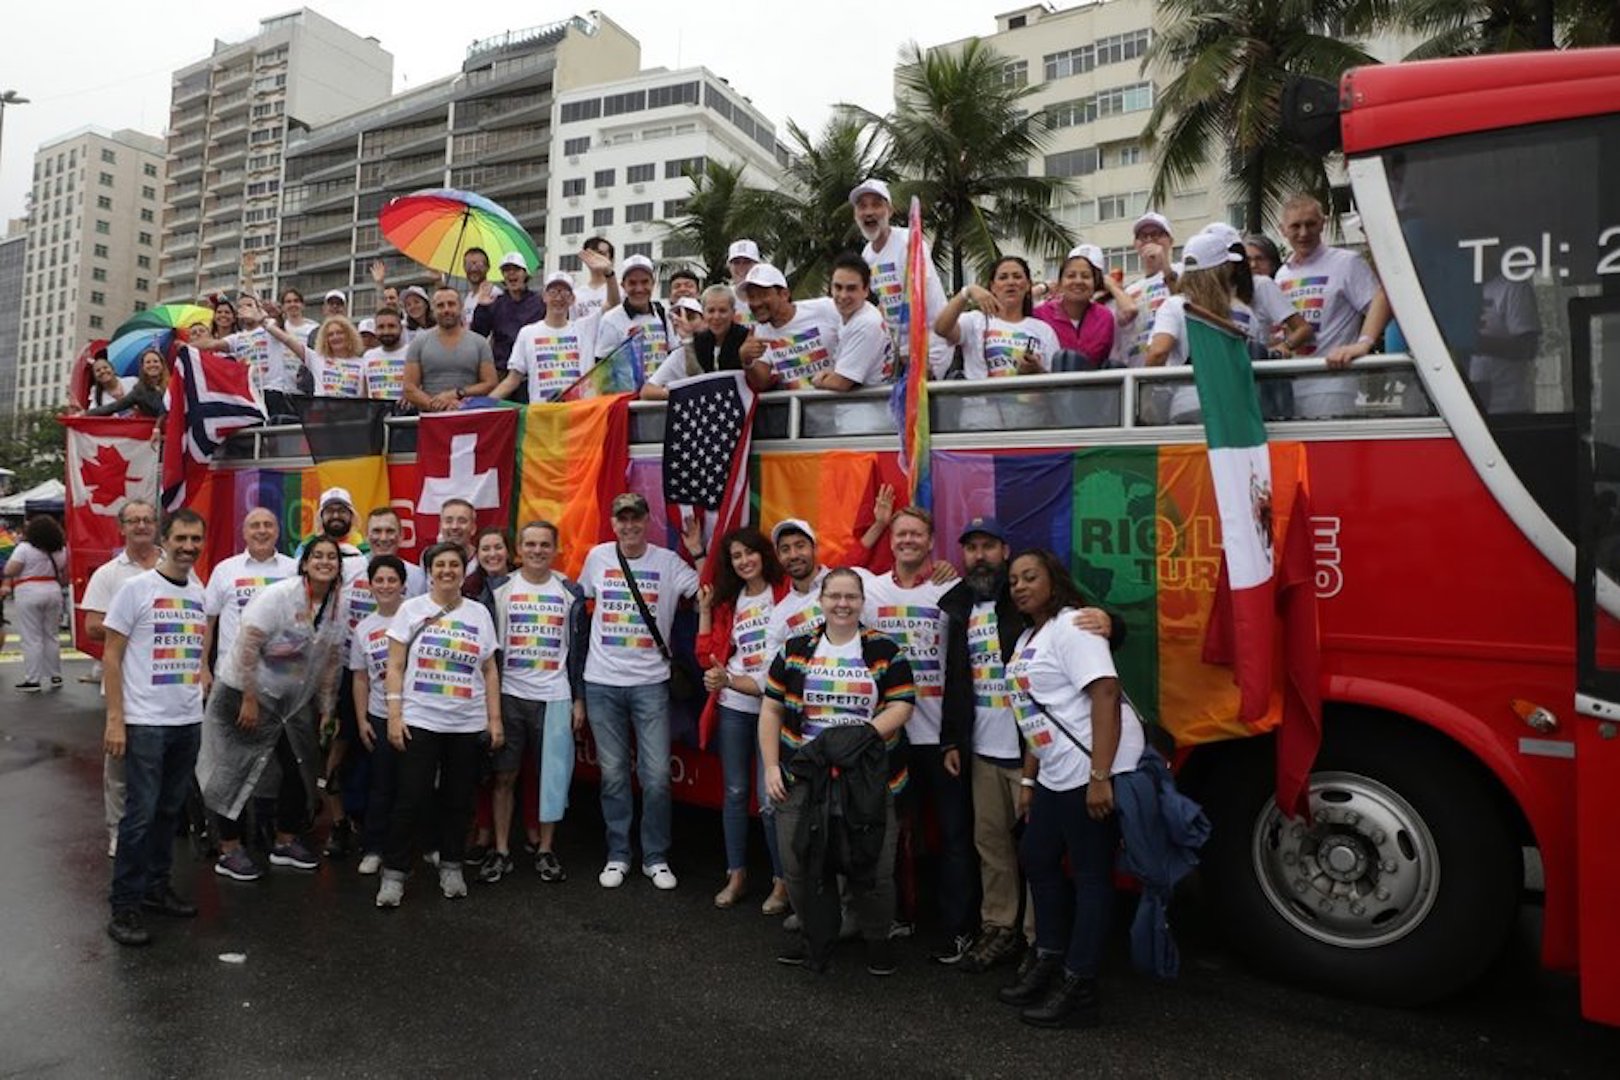 Brazil,Rio's foreign consular corps joined more than 800,000 in the LBGTi parade in Copacabana Beach.